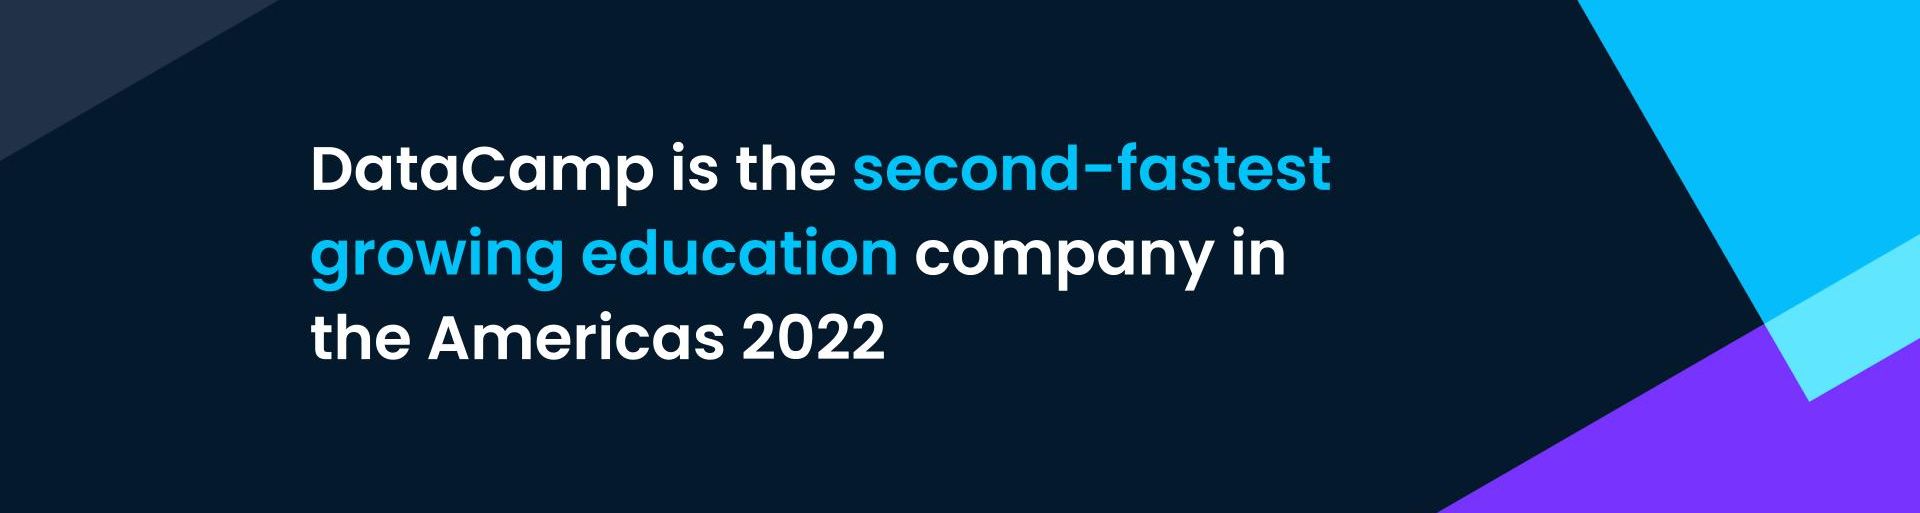 DataCamp is the second-fastest growing education company in the Americas 2022